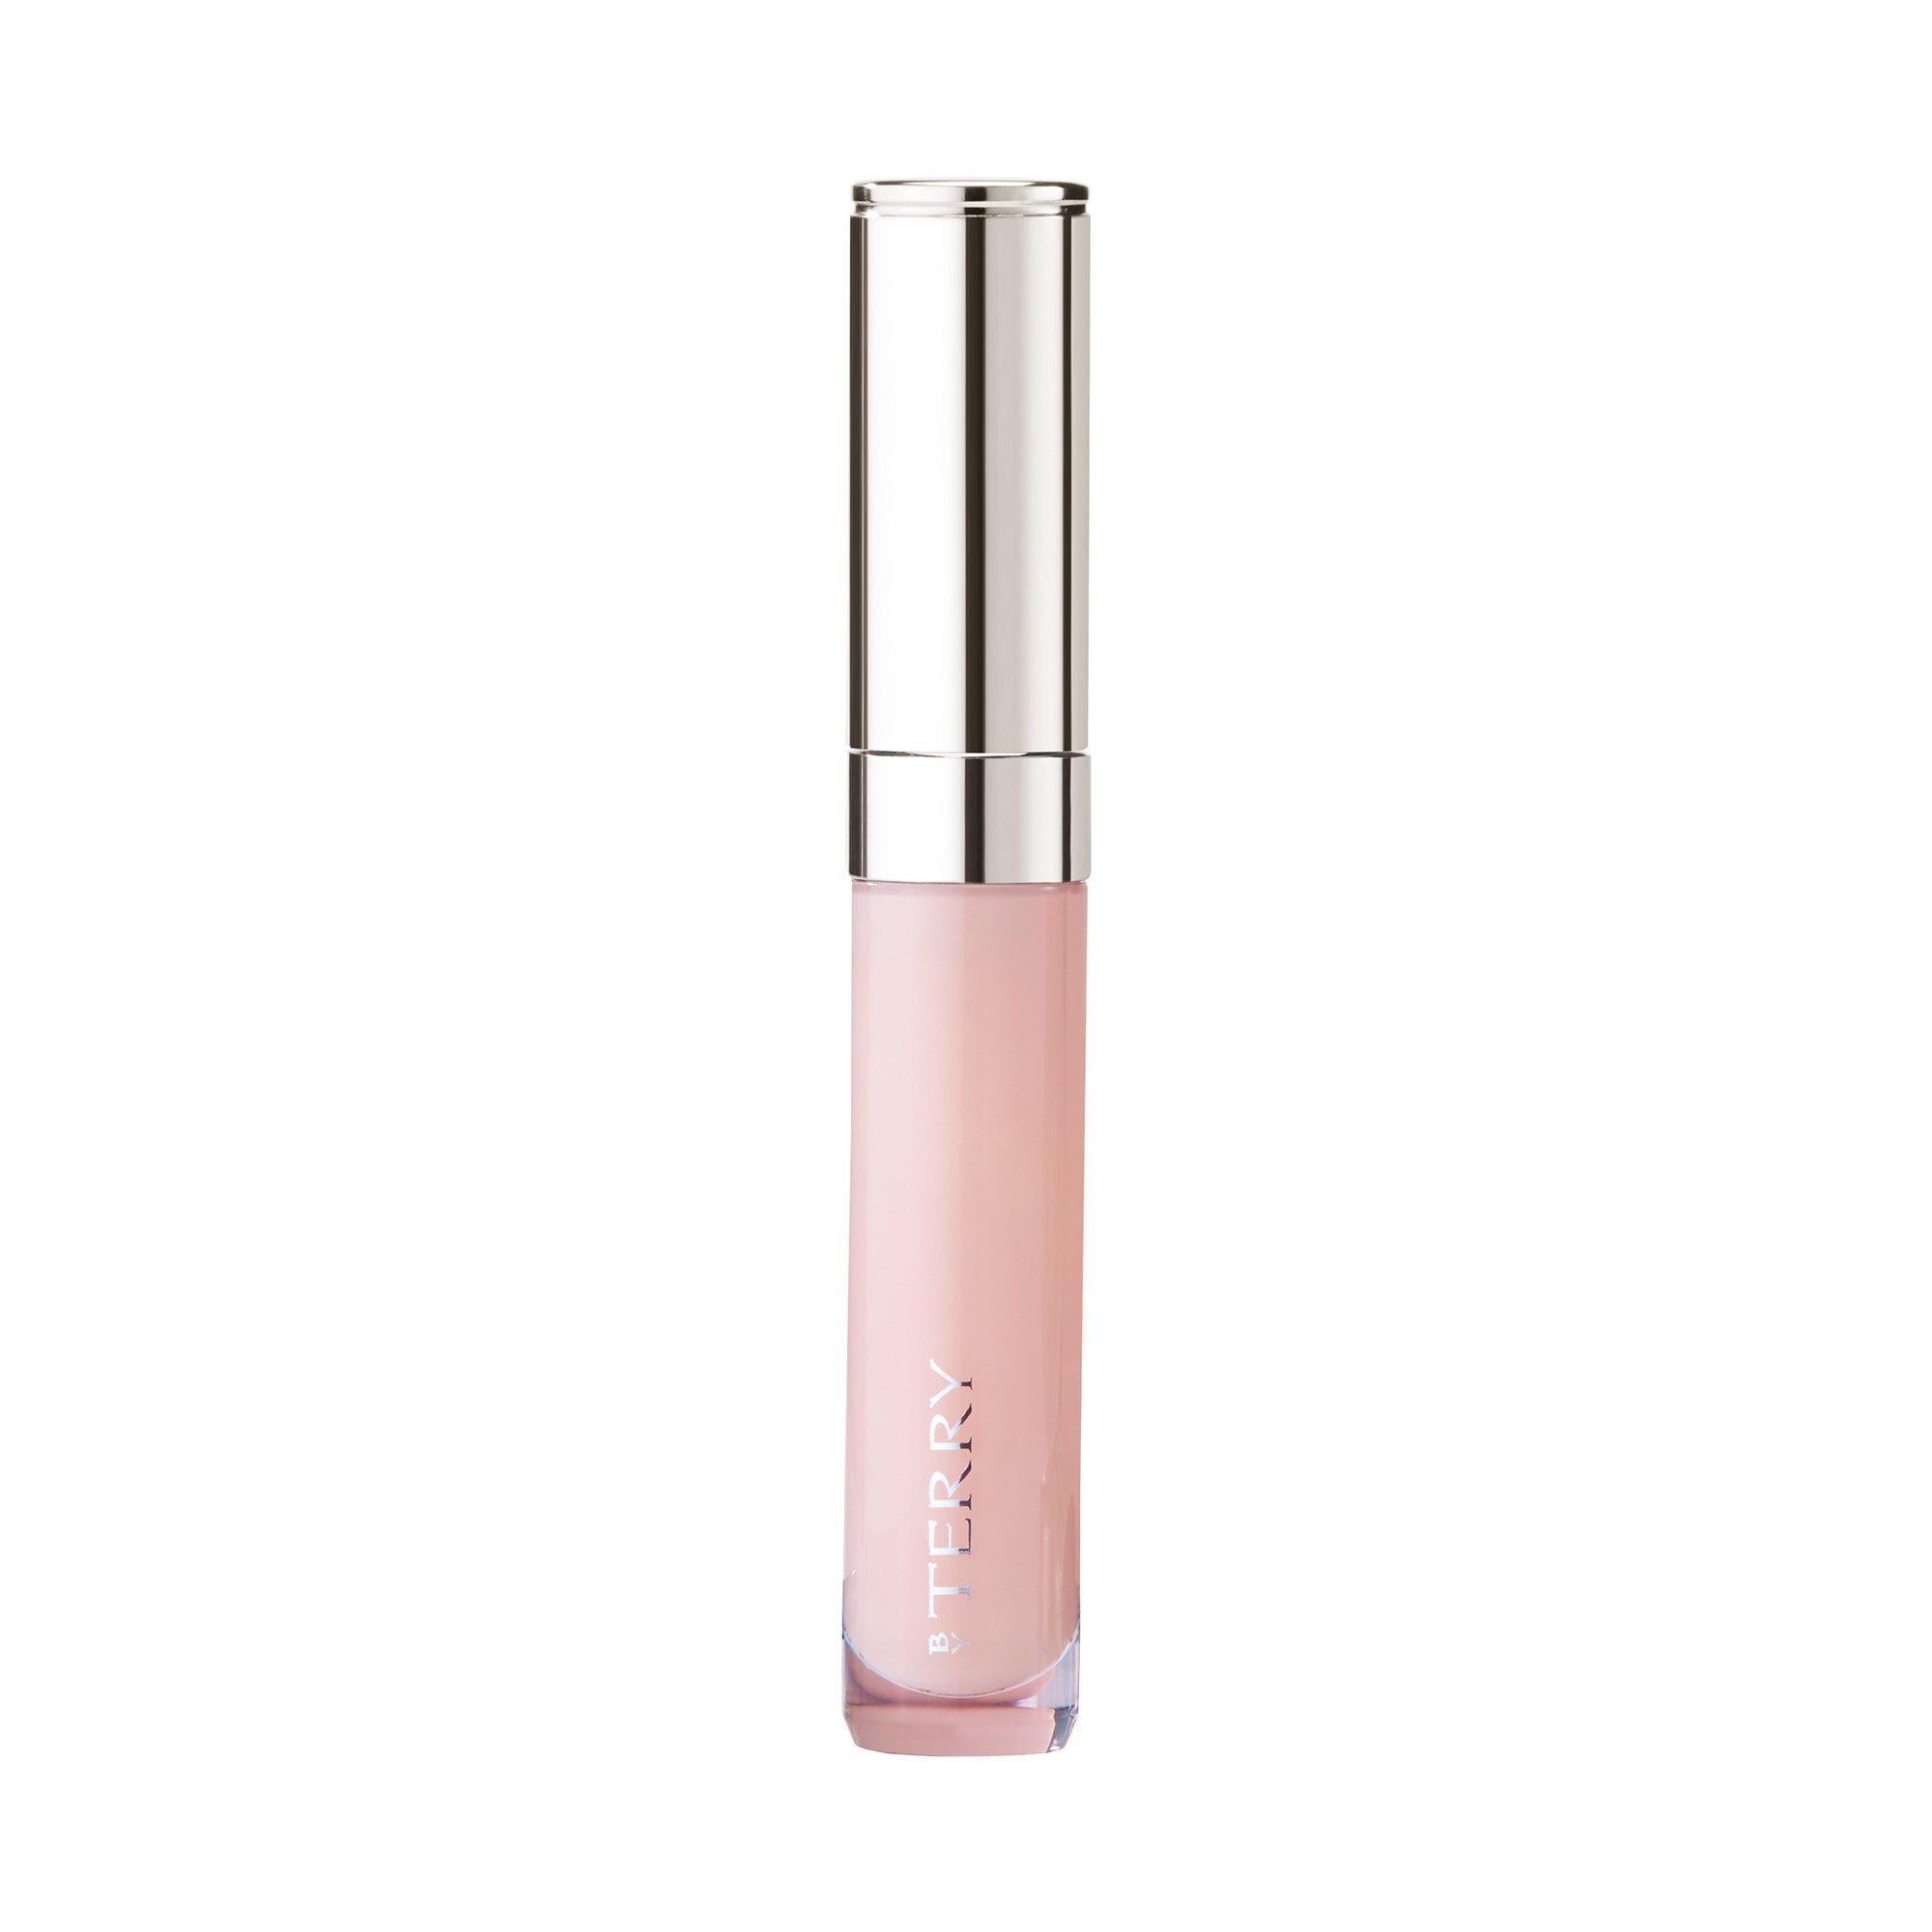 Image of BY TERRY Baume de Rose Flaconnette - 7ml